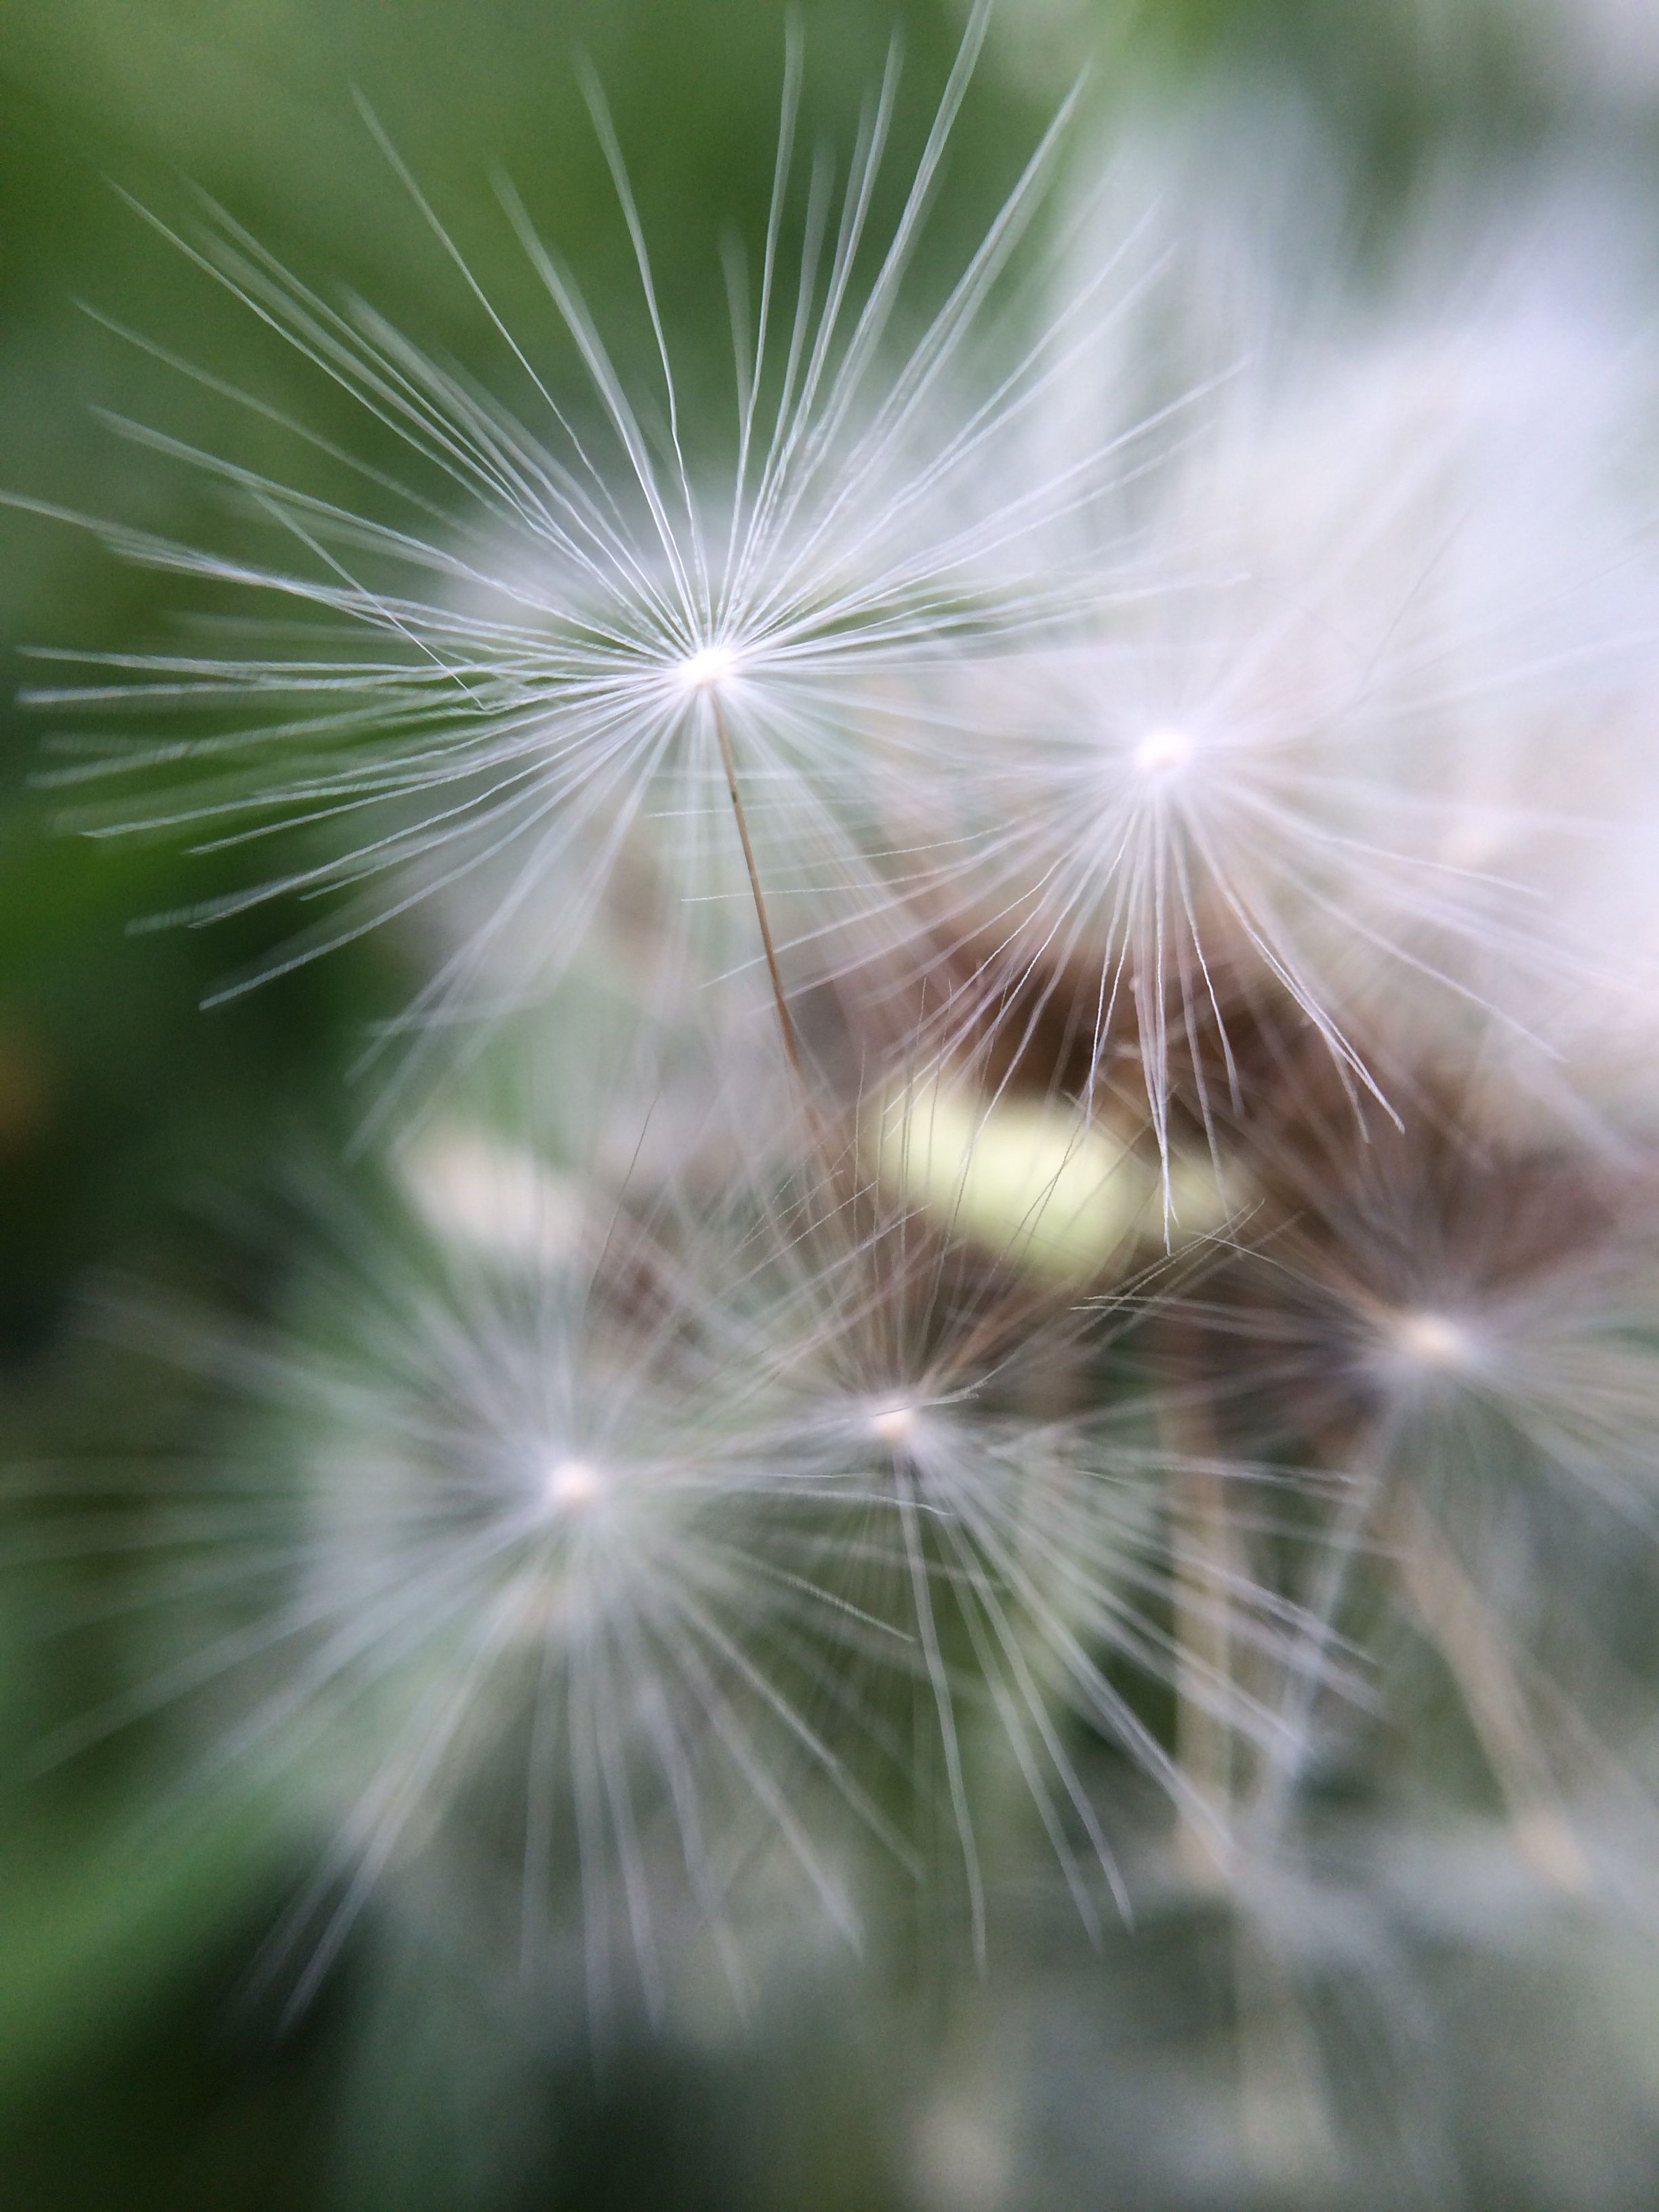 Dandelion photo taken using an iphone5s with the olloclip using the ...